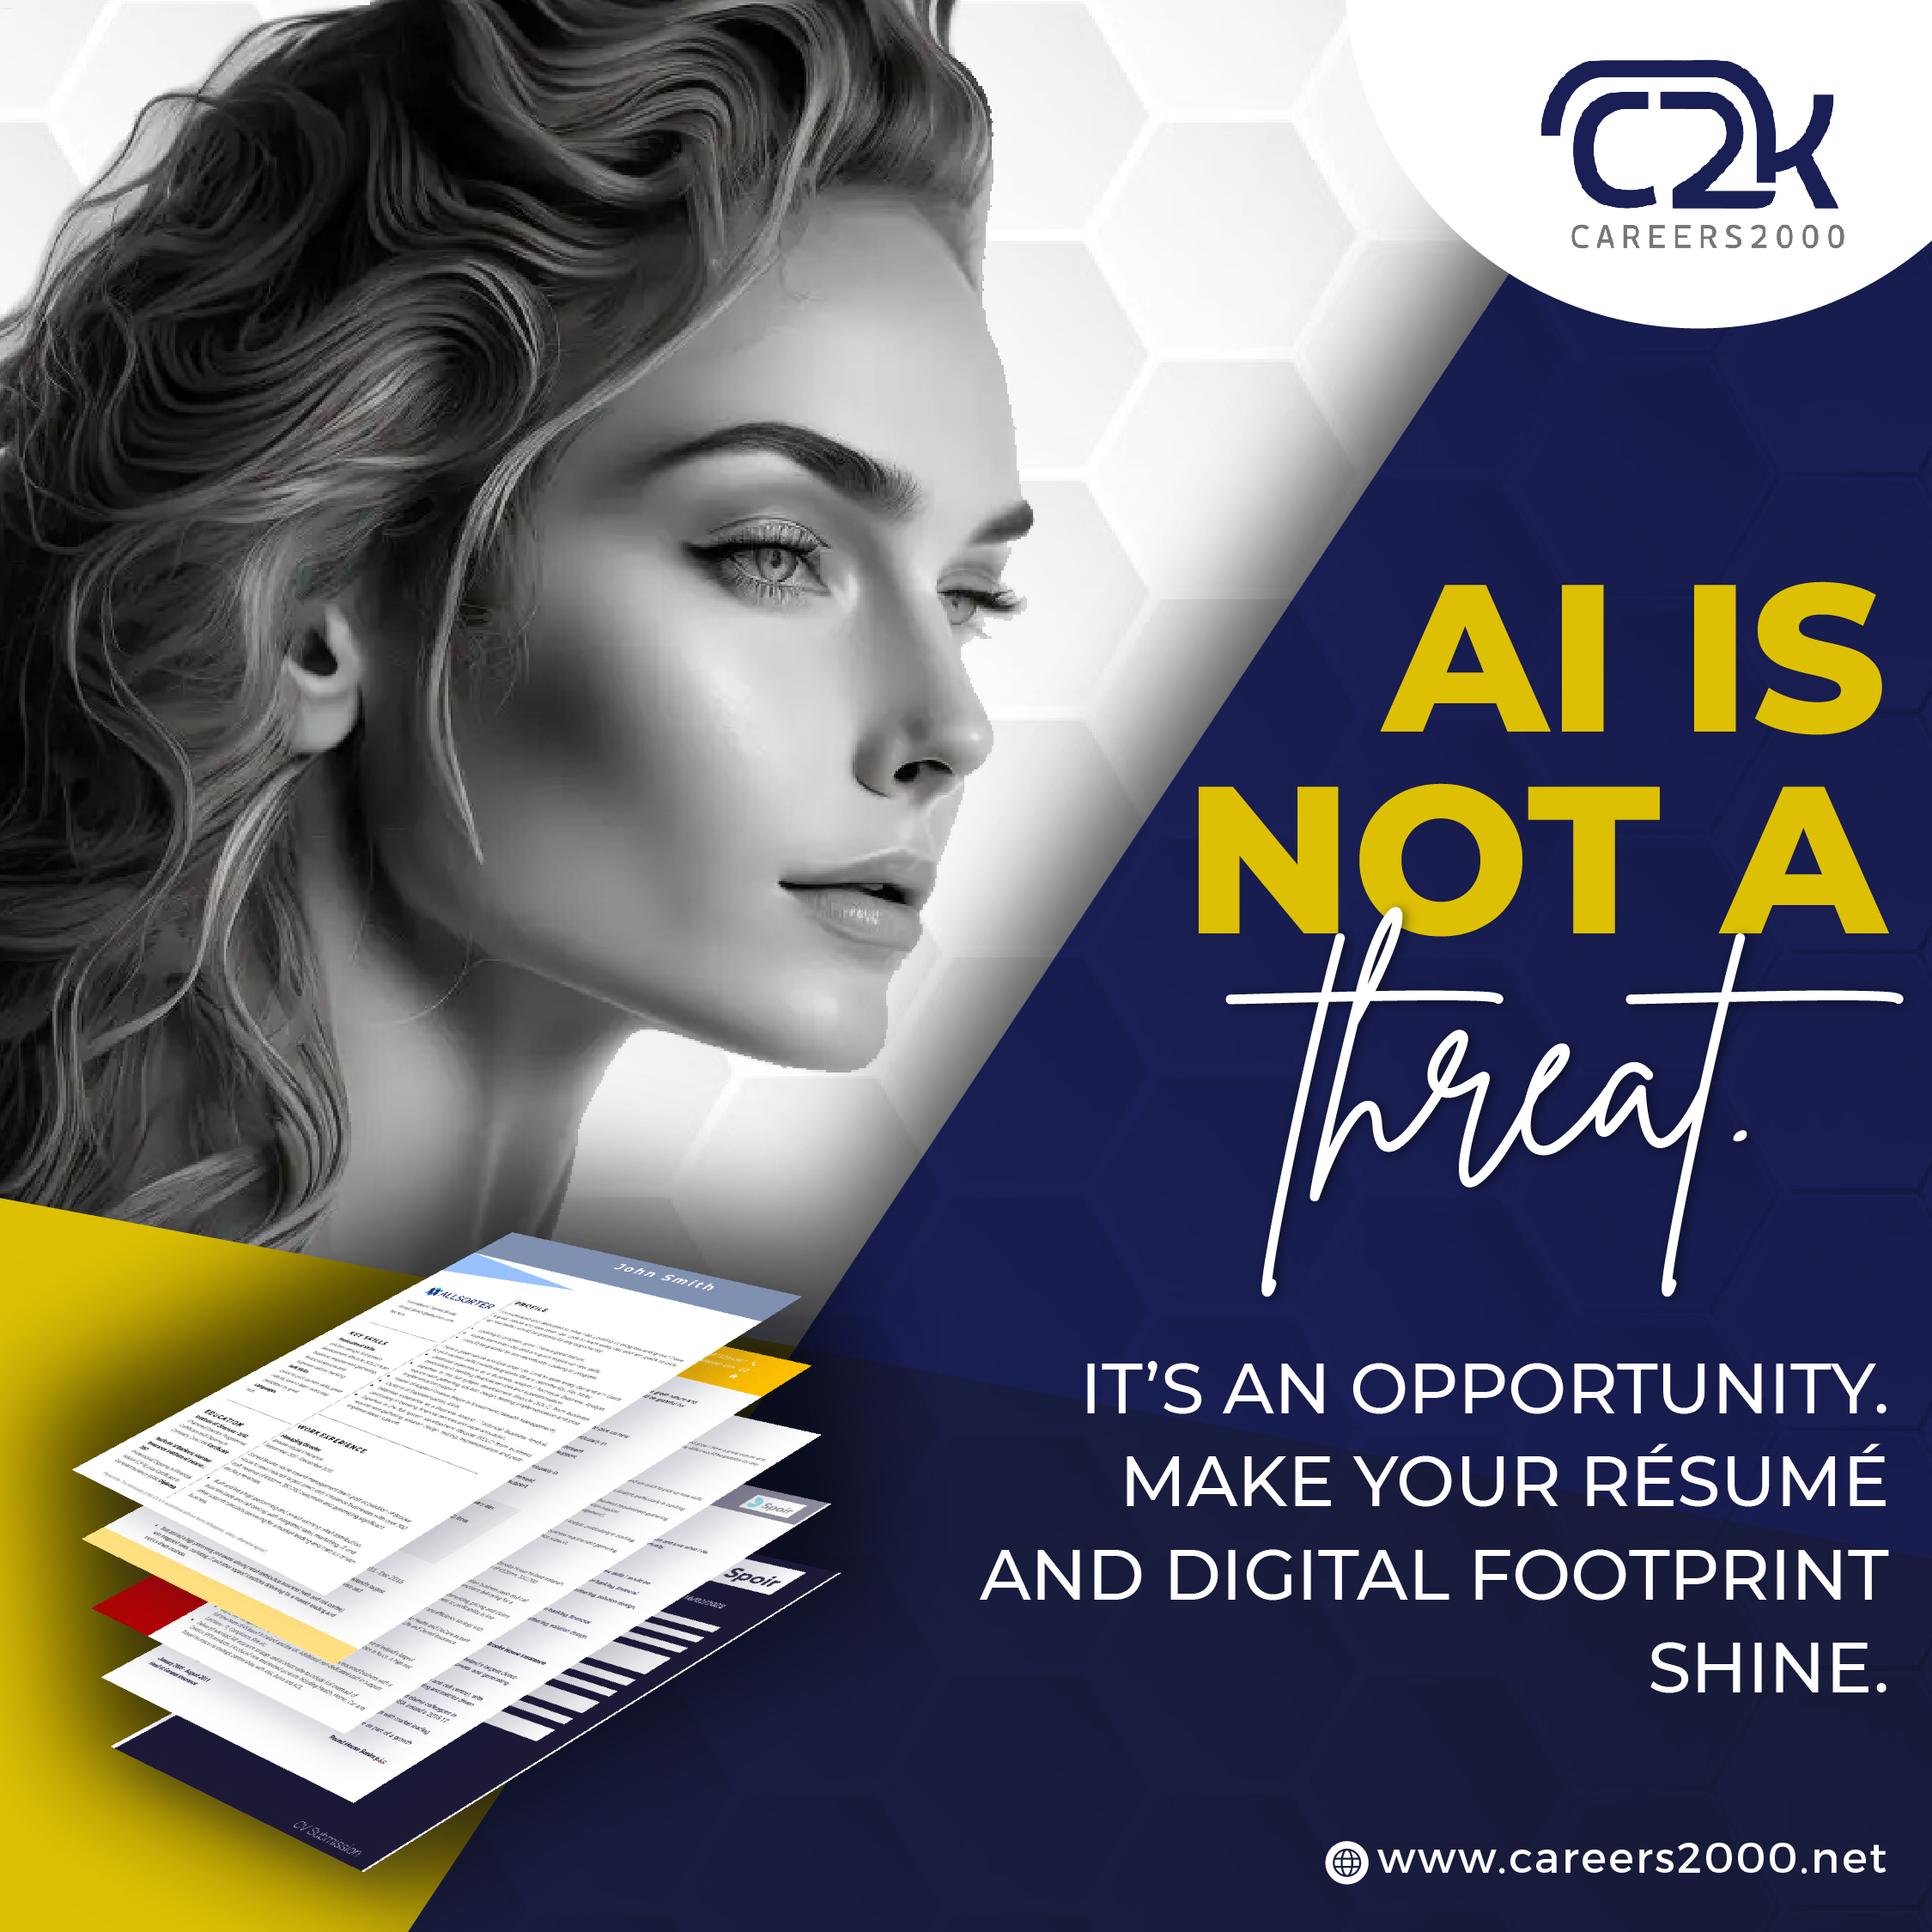 AI is not a threat. It’s an opportunity. Make your résumé and digital footprint shine.